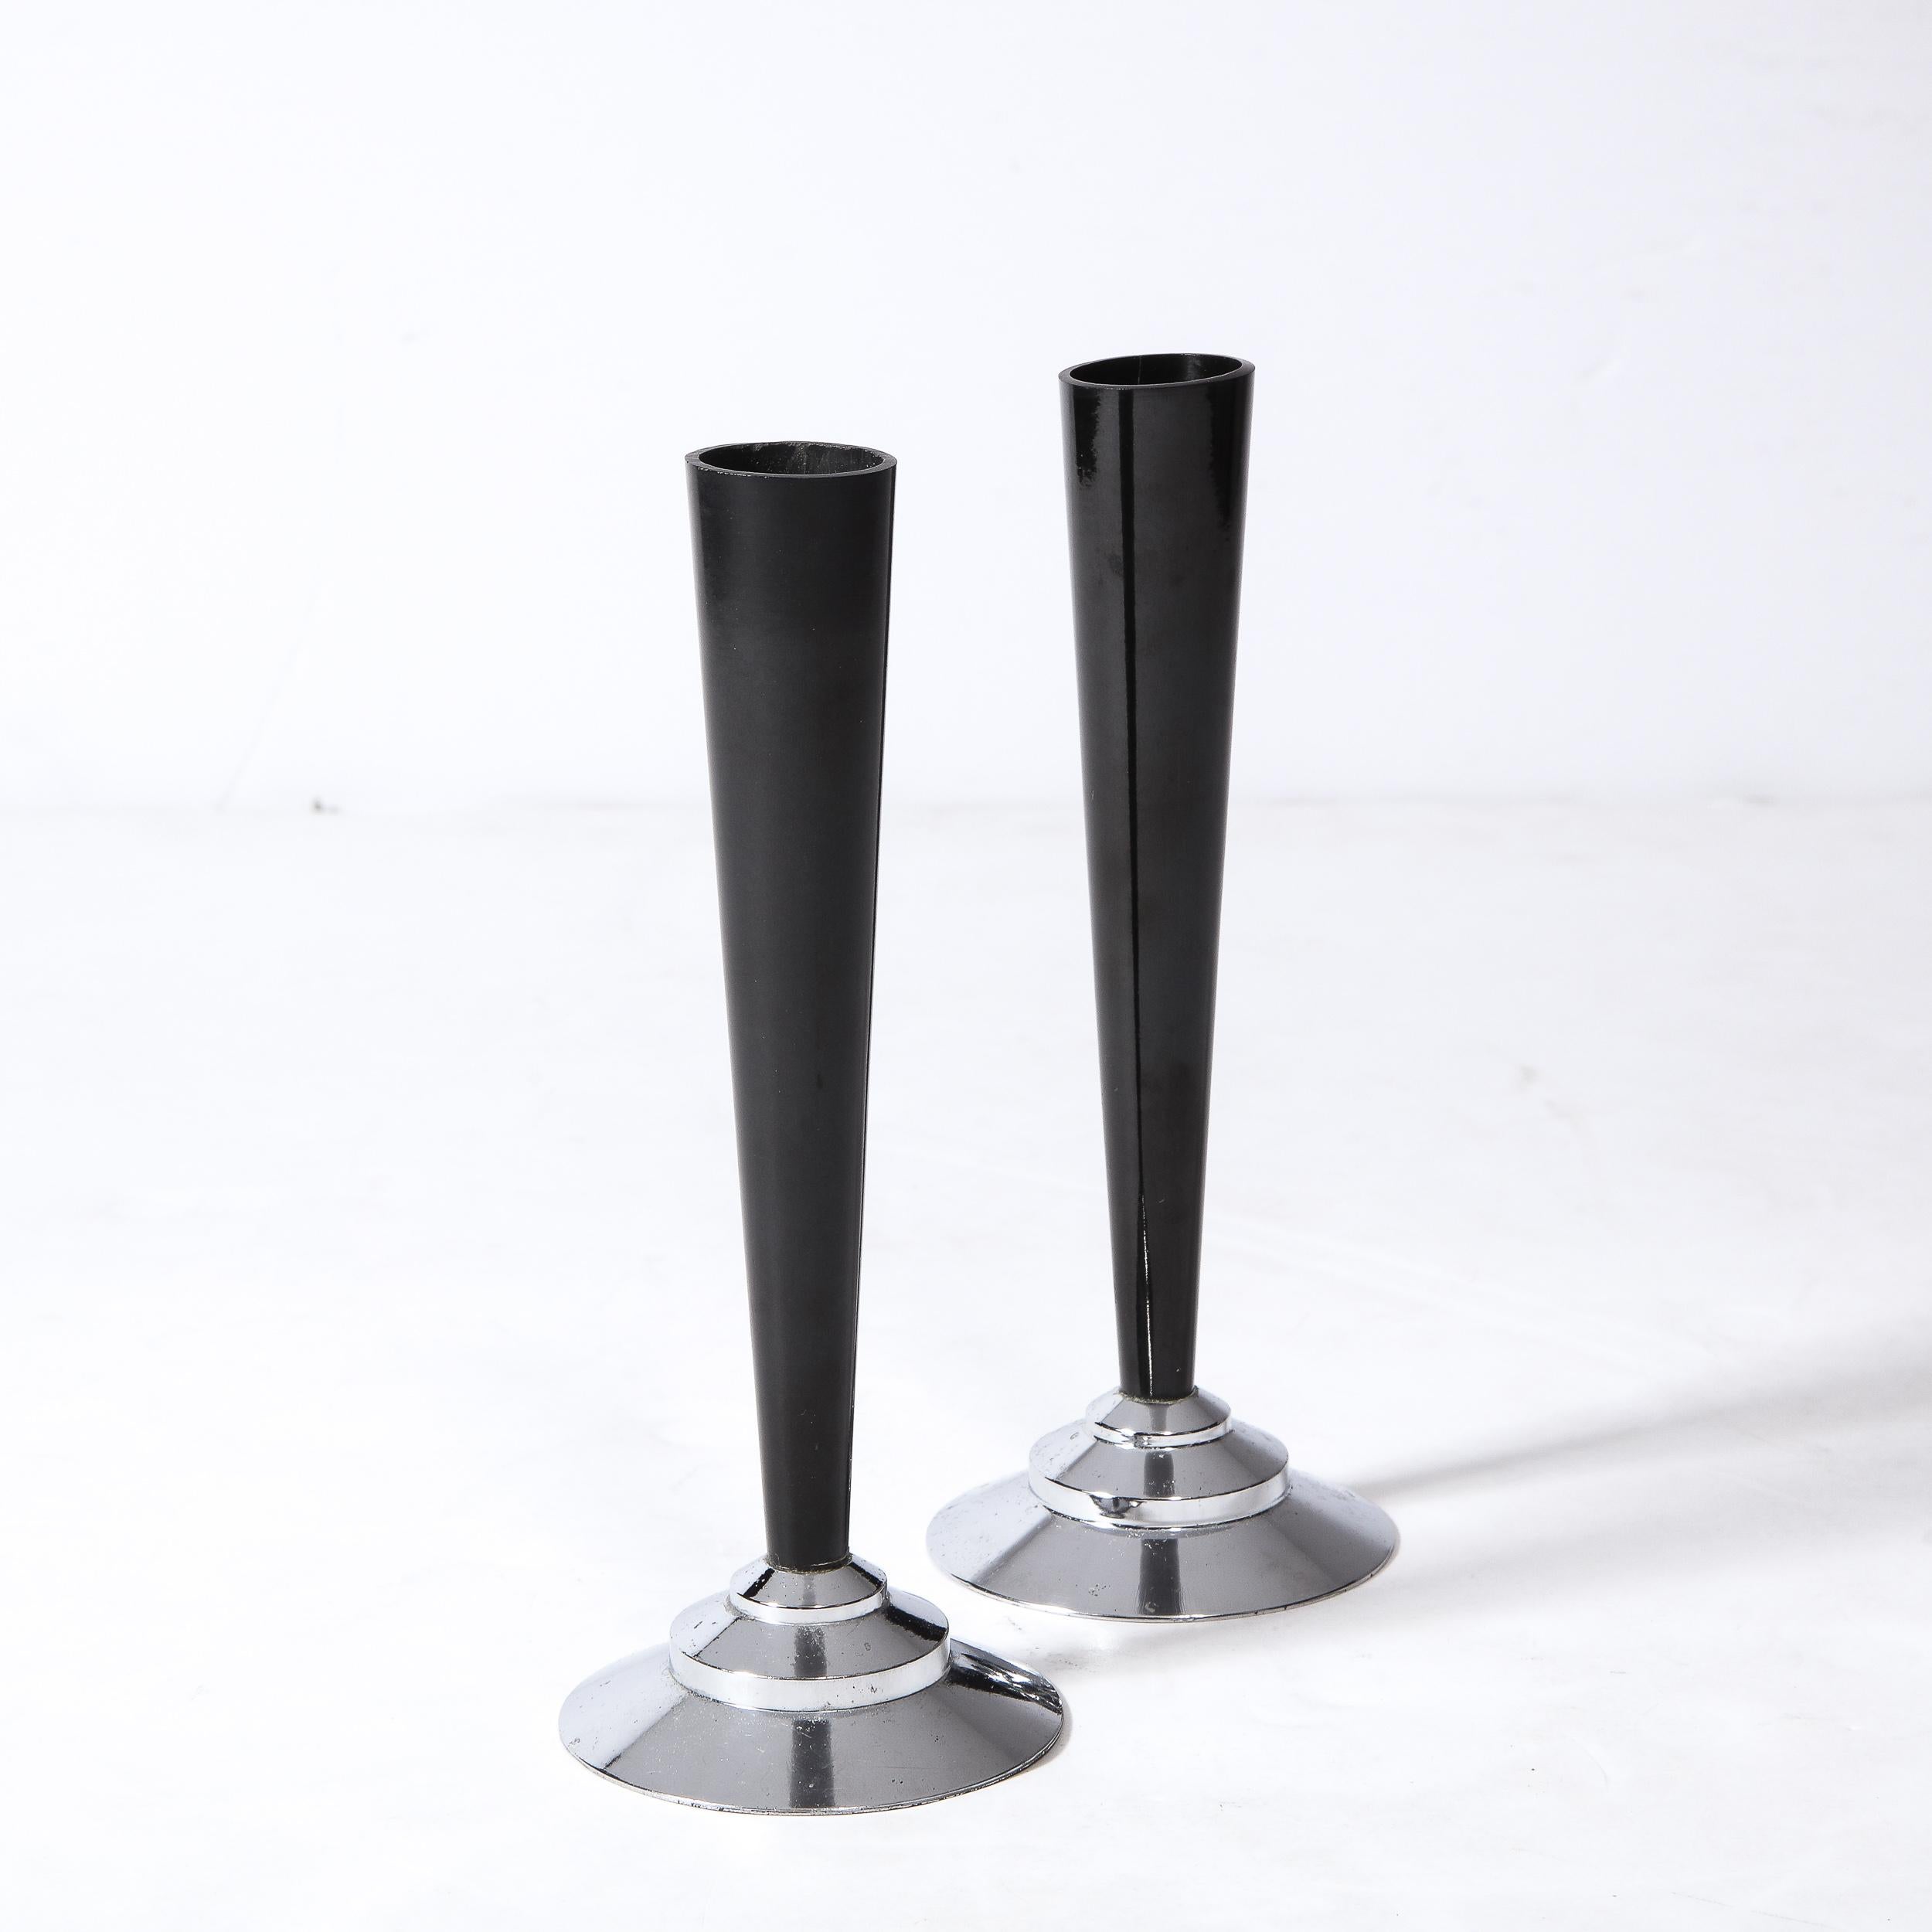 This stunning pair of Art Deco Machine Age skyscraper style vases were realized in the United States circa 1935. They feature tiered skyscraper form bases and tapered cylindrical bodies in black bakelite. With its clean modernist lines and